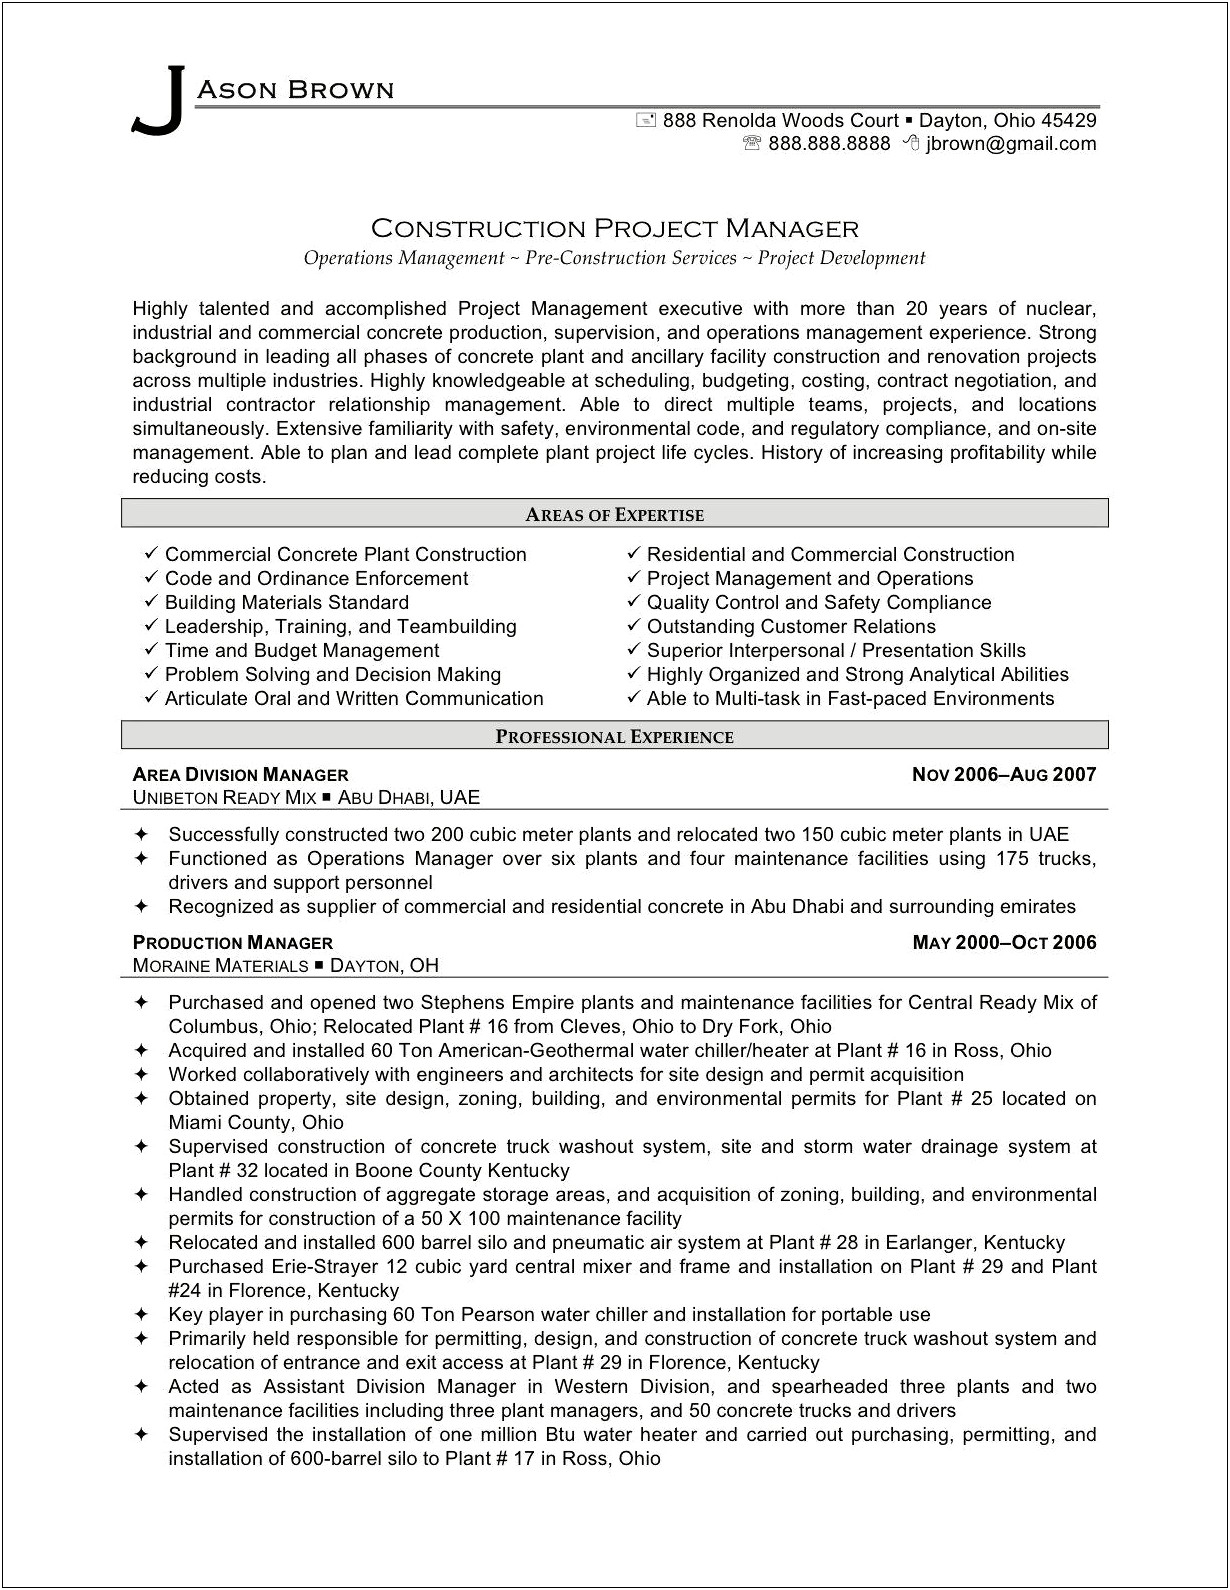 Best Resume Attributes For Construction Project Engineer